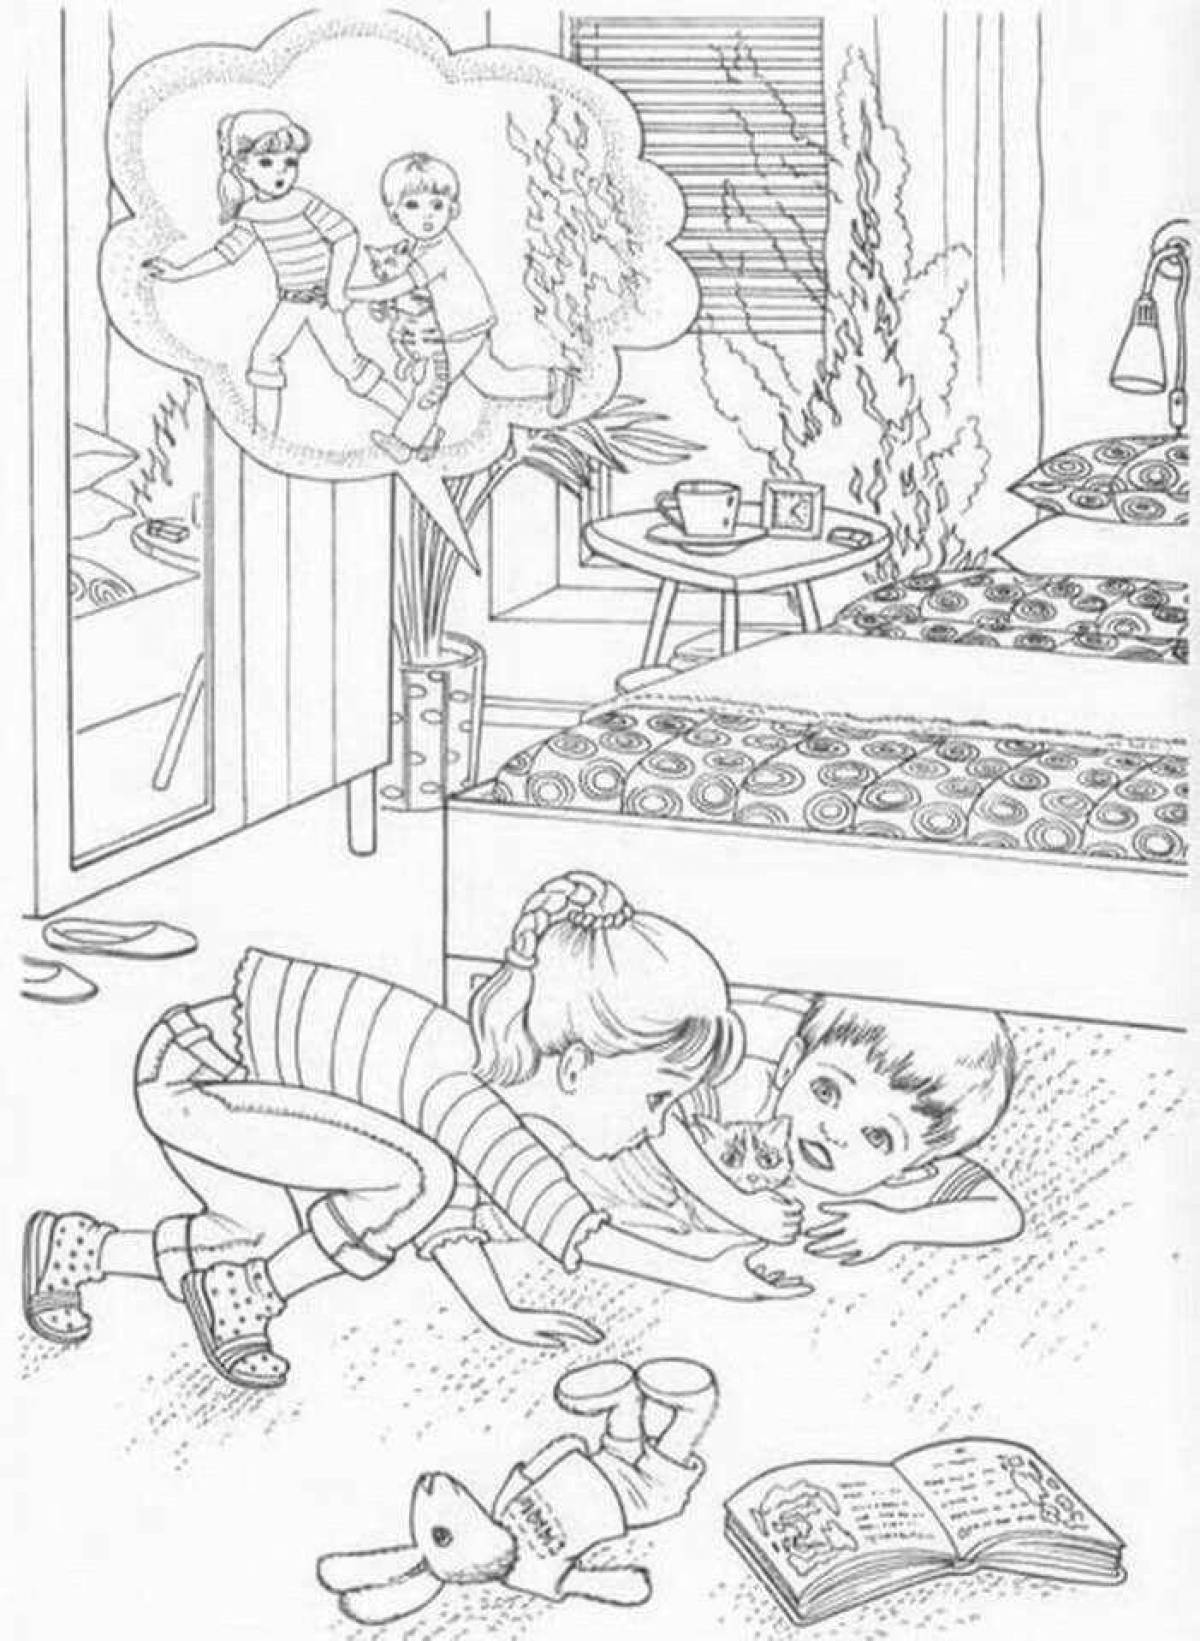 Calming home alone coloring book